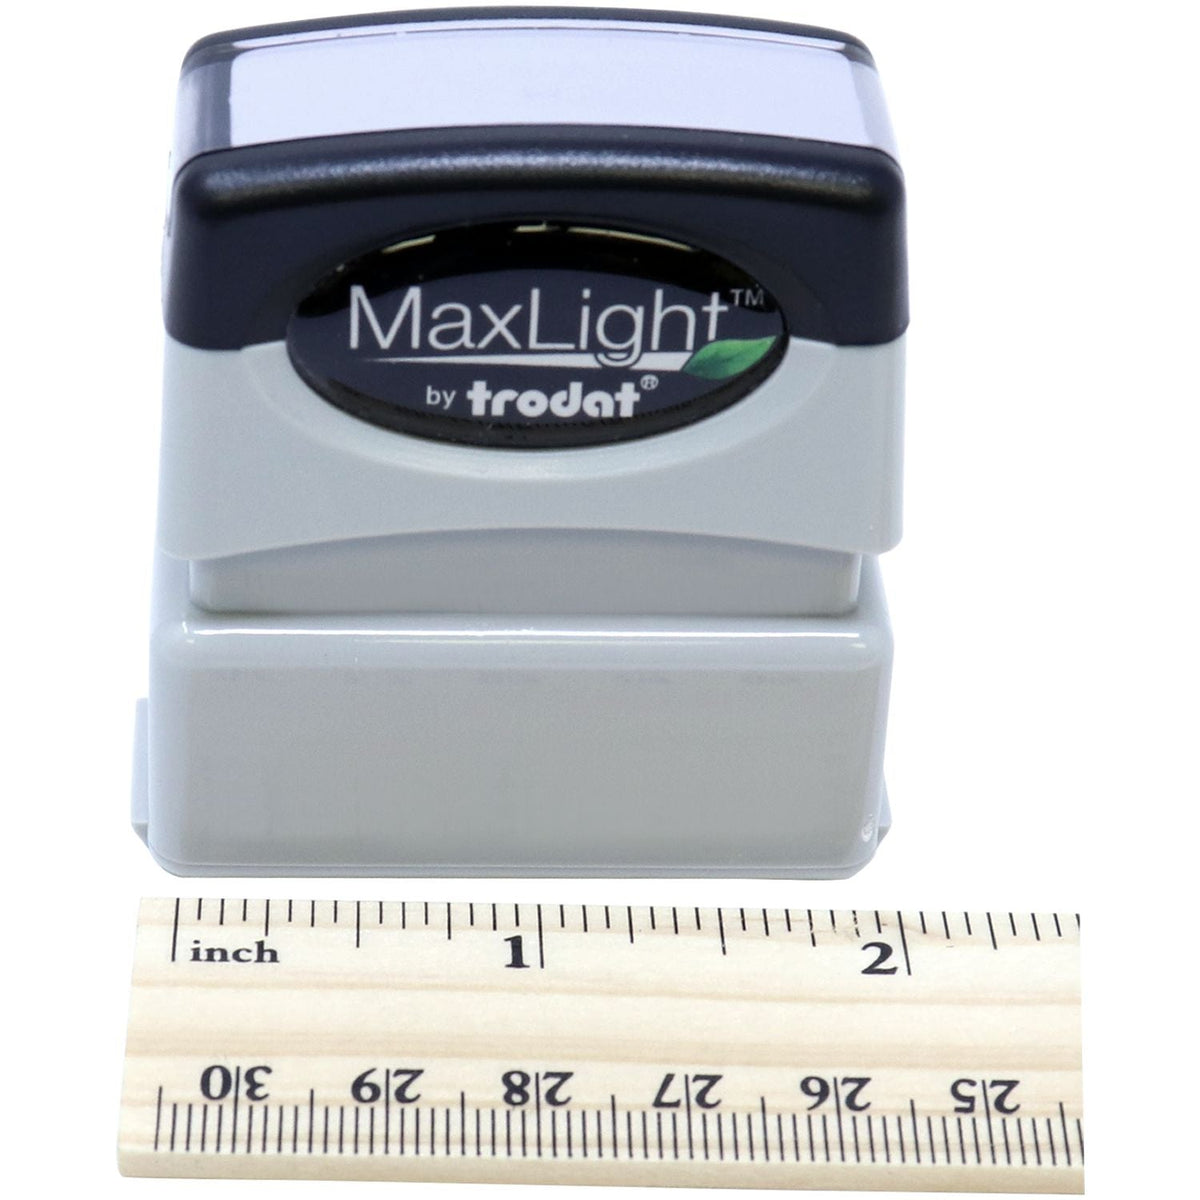 Maxlight Pre Inked Stamp Xl2 75 Front Ruler